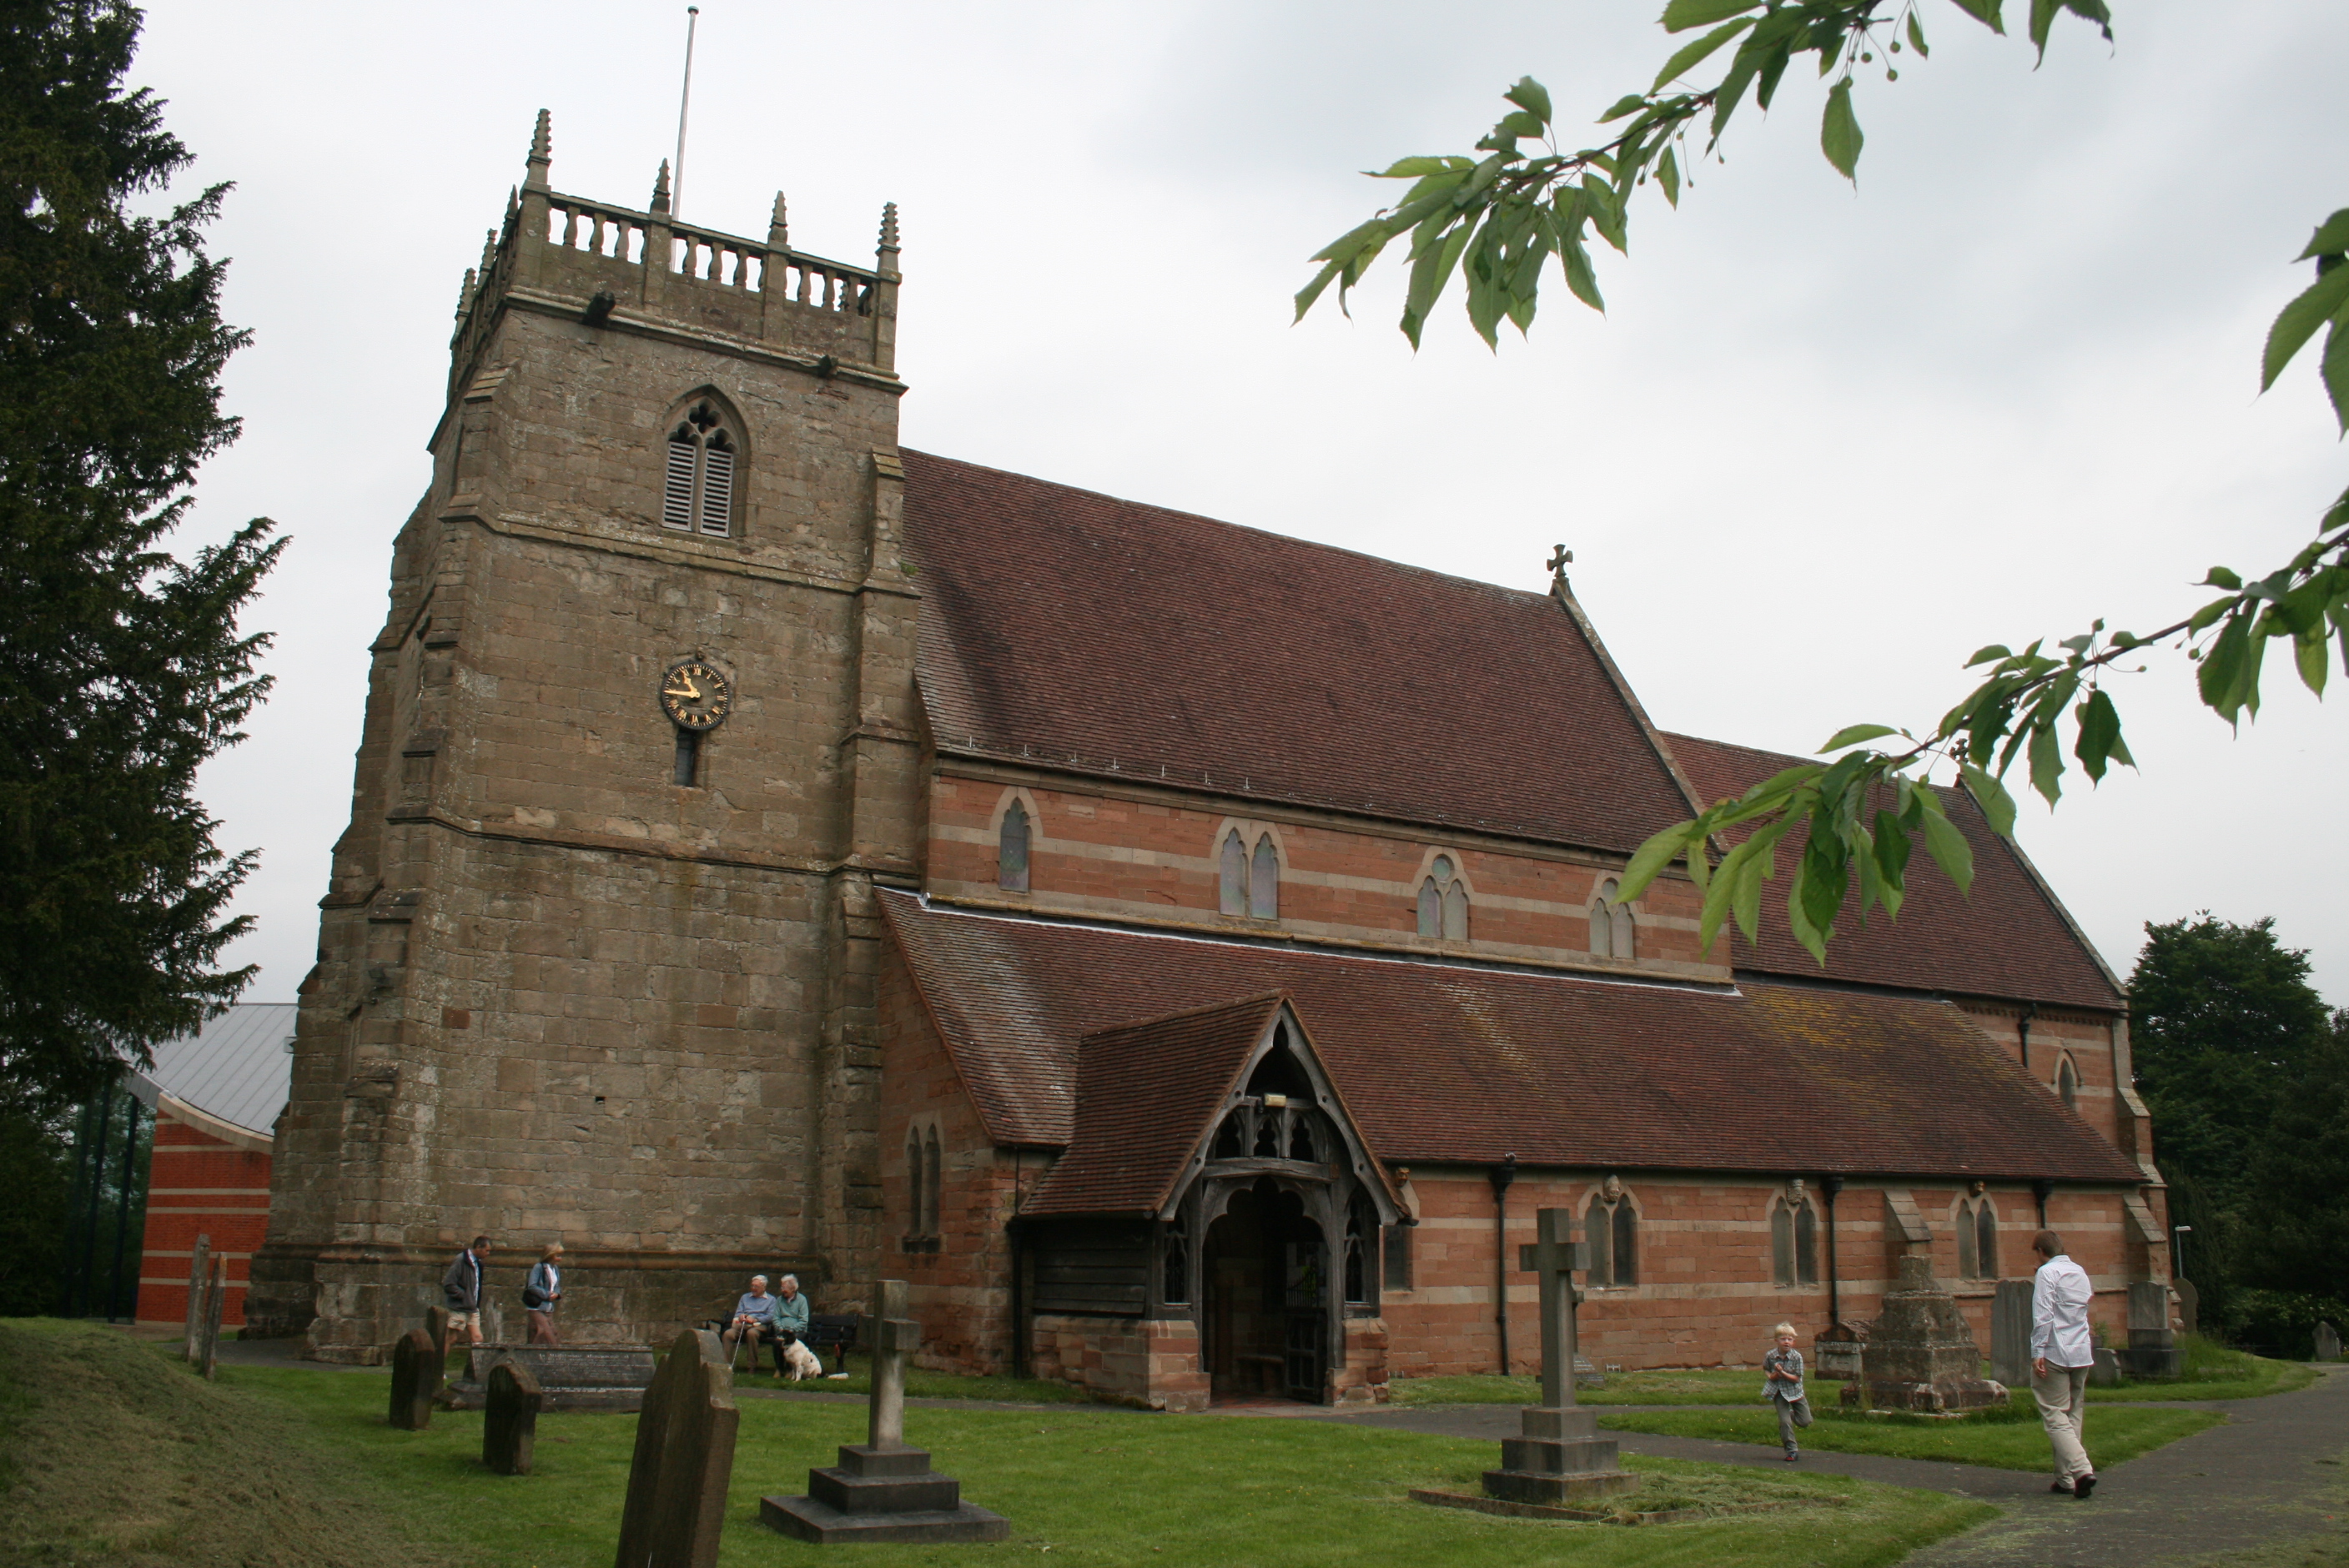 St Laurence's Church in Alvechurch